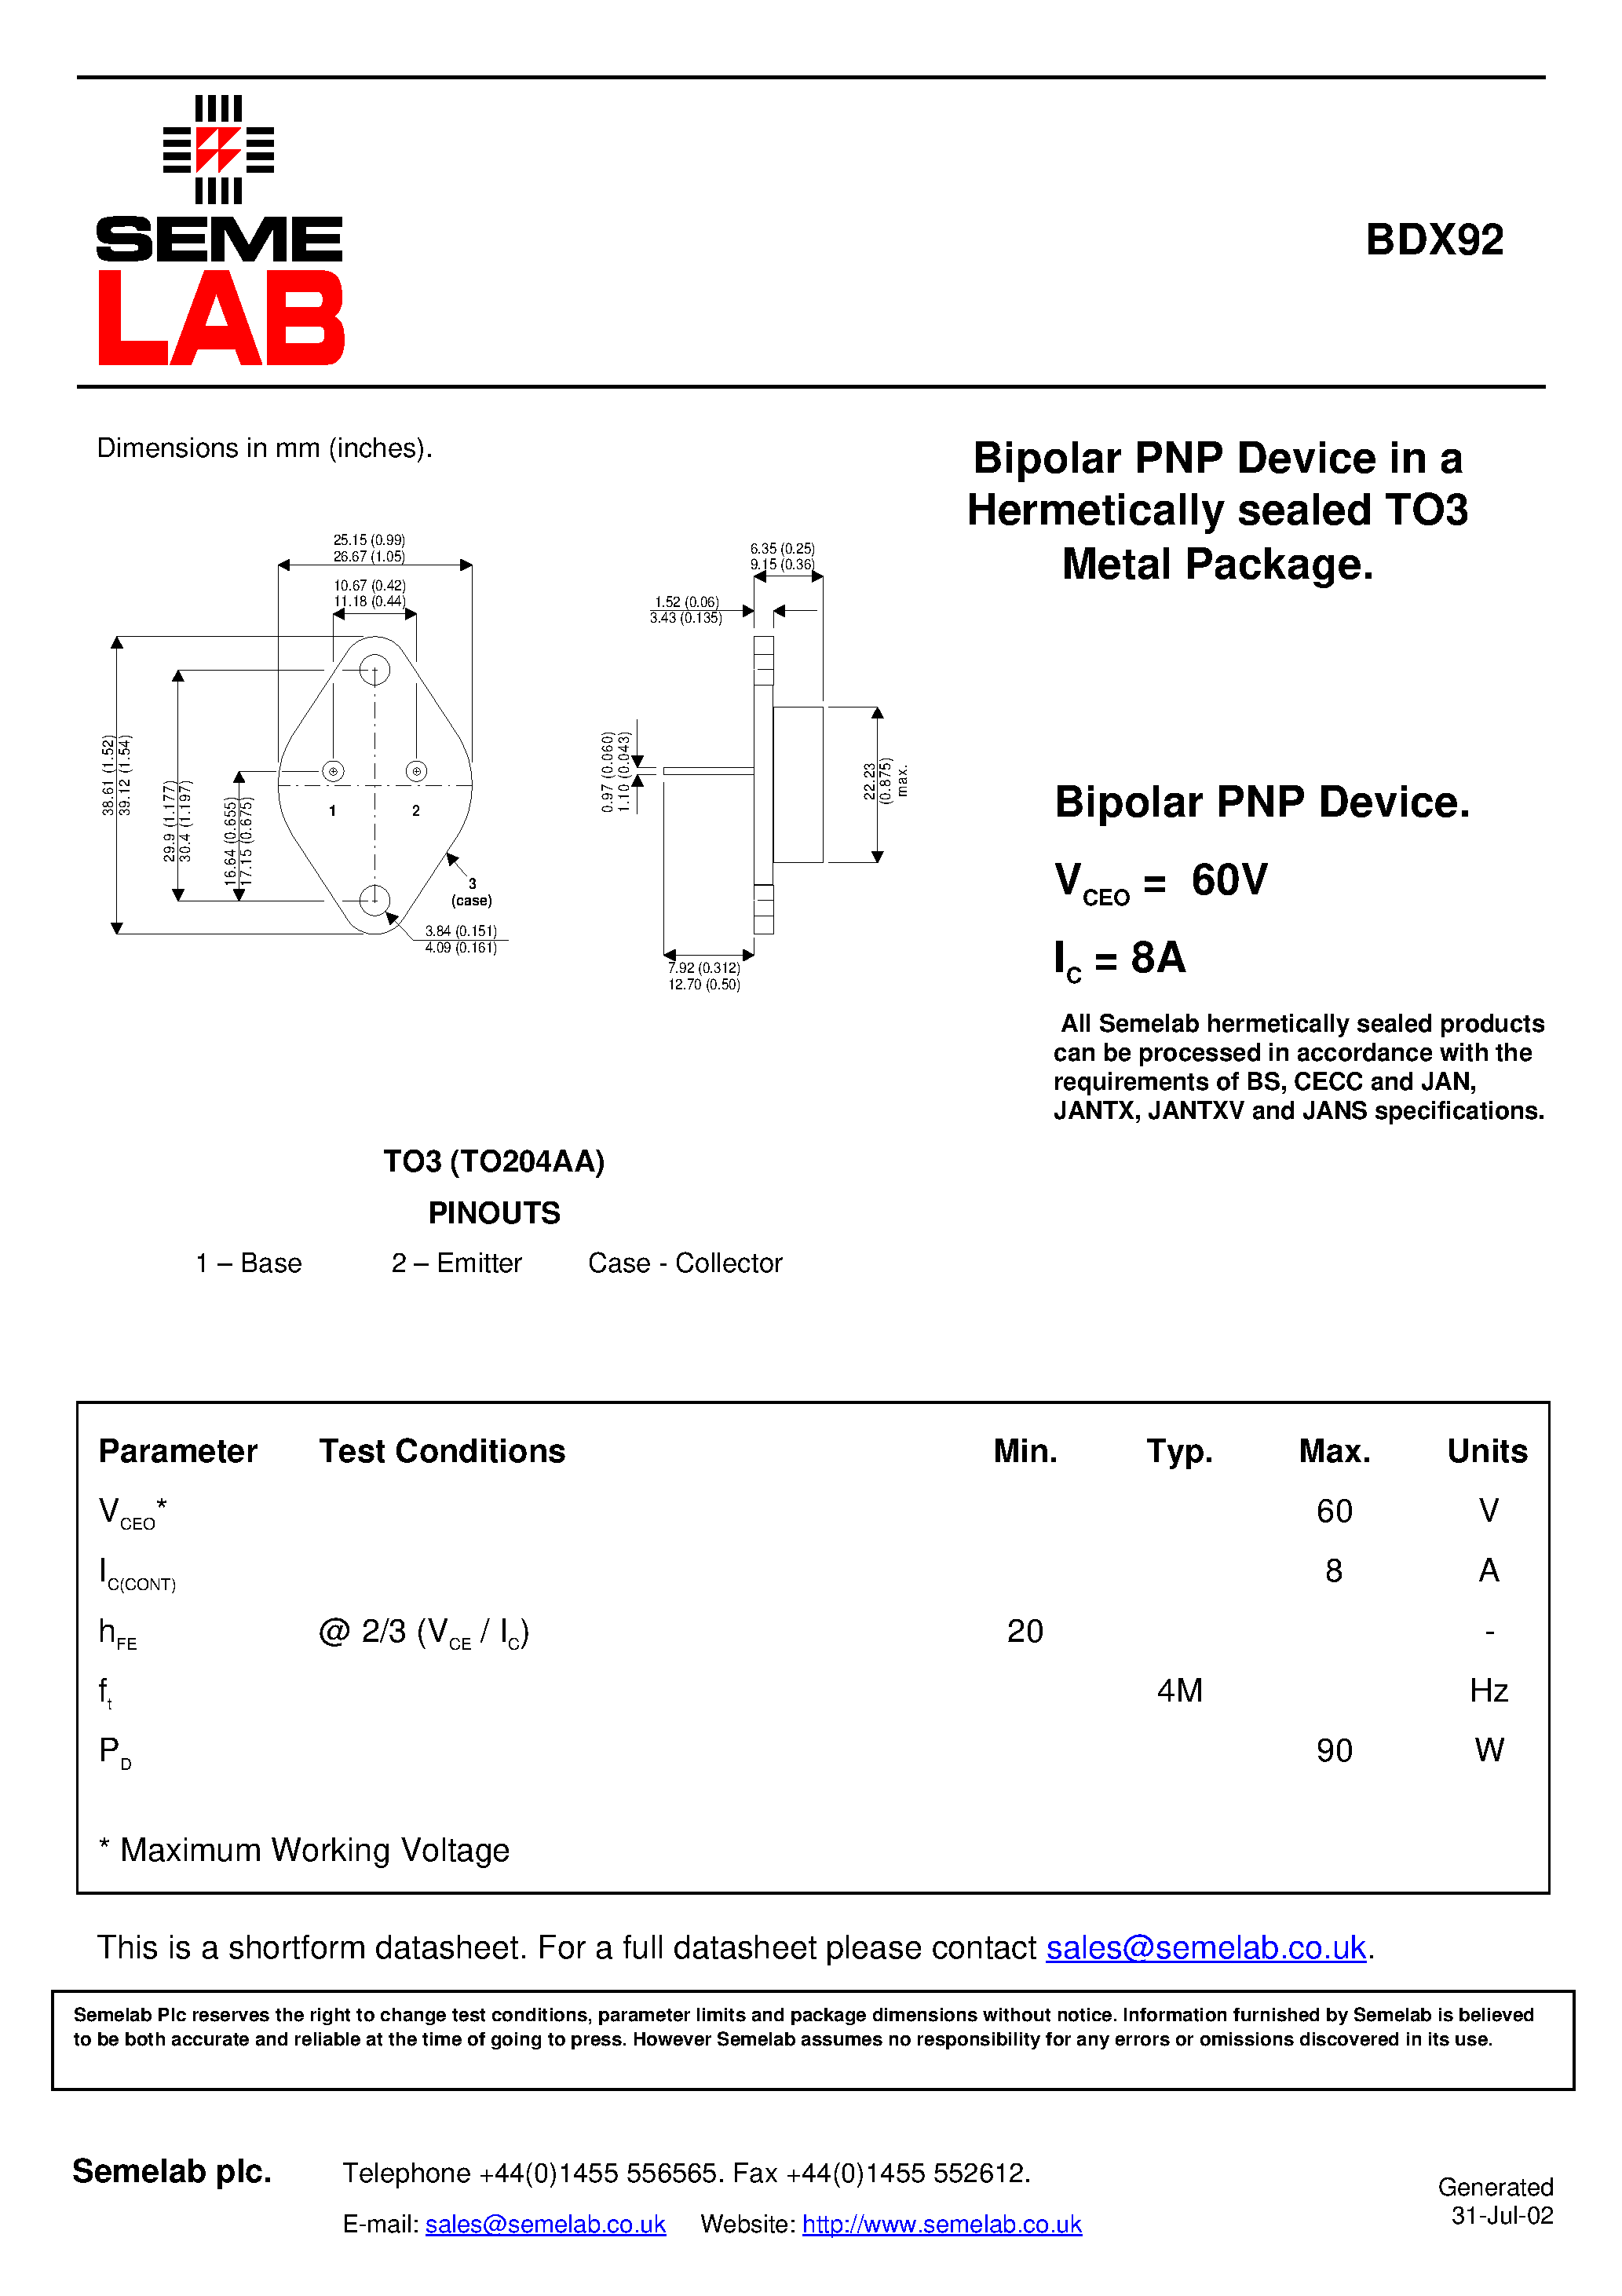 Datasheet BDX92 - Bipolar PNP Device in a Hermetically sealed TO3 Metal Package page 1